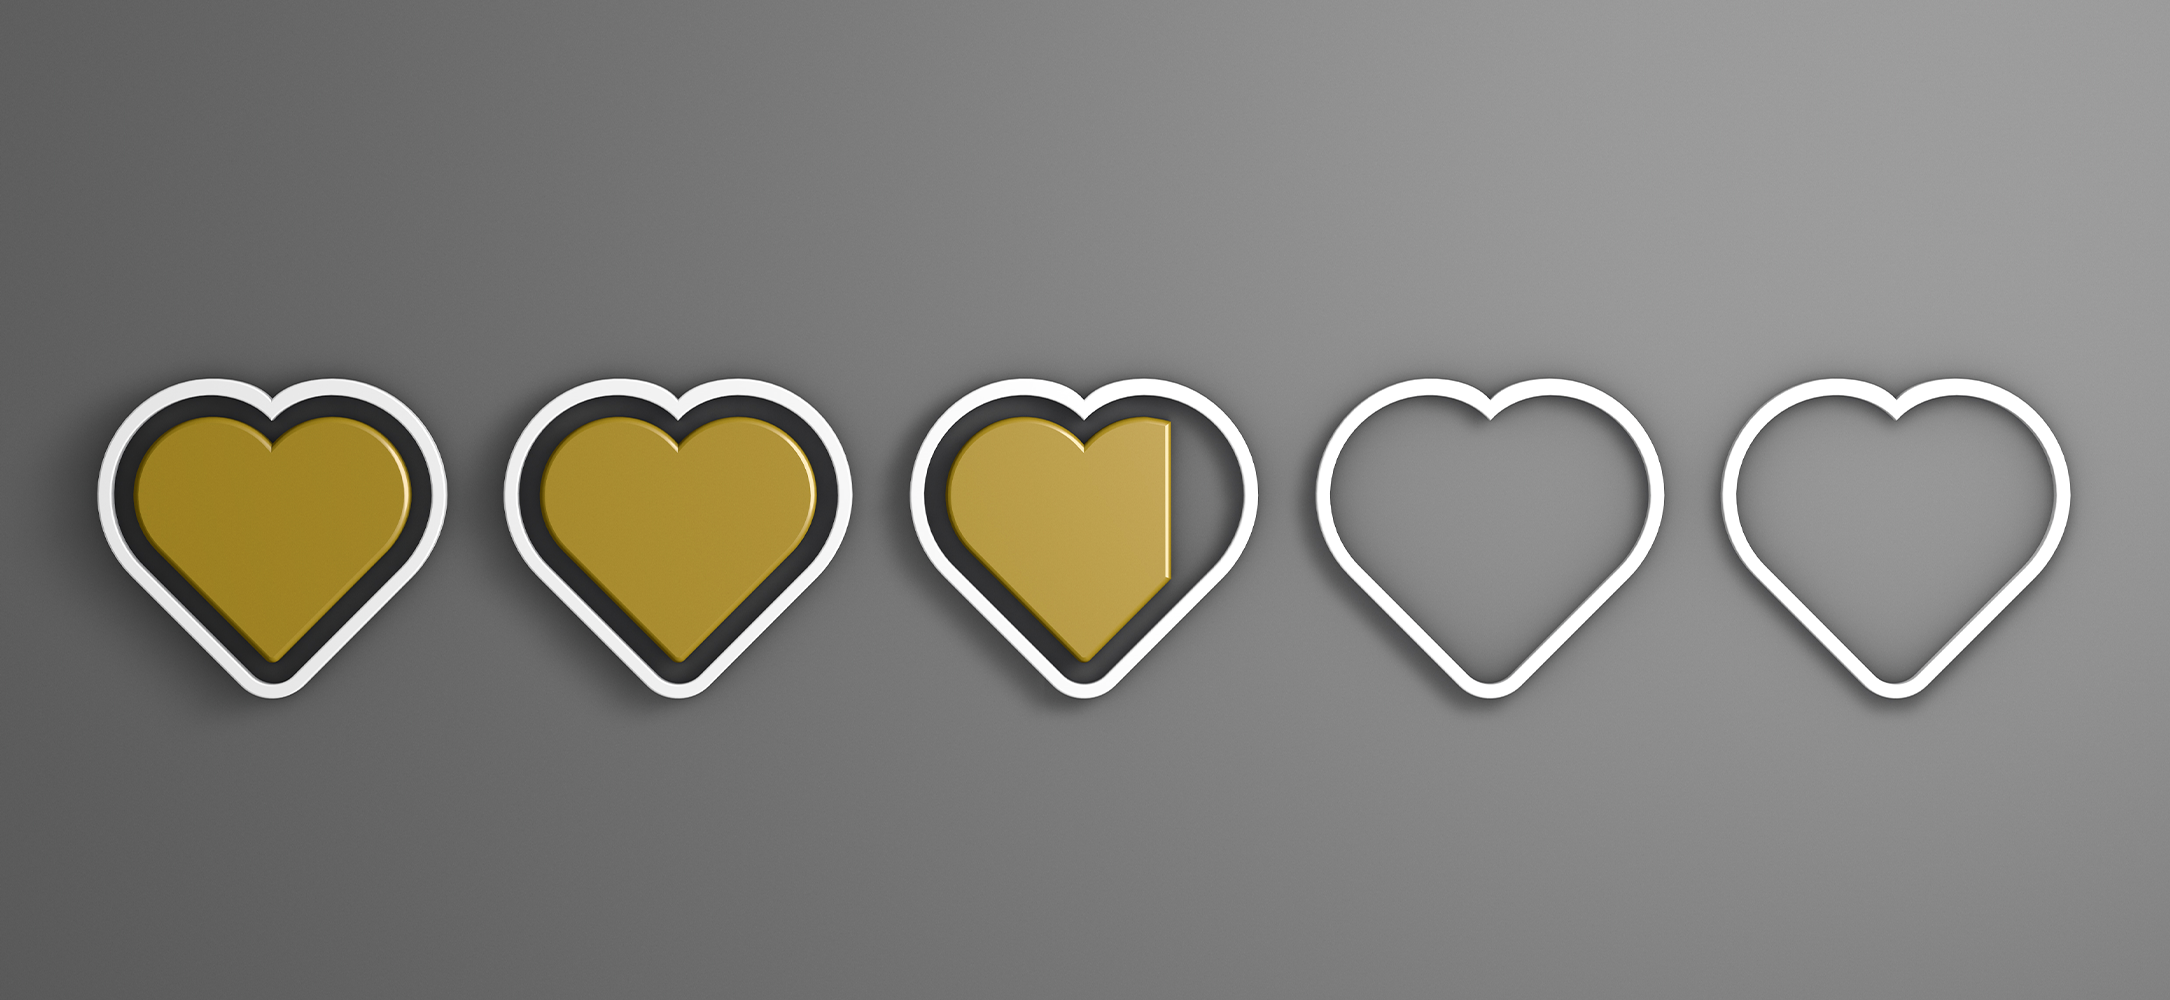 Five illustrated hearts, with three filled in, representing customer satisfaction.